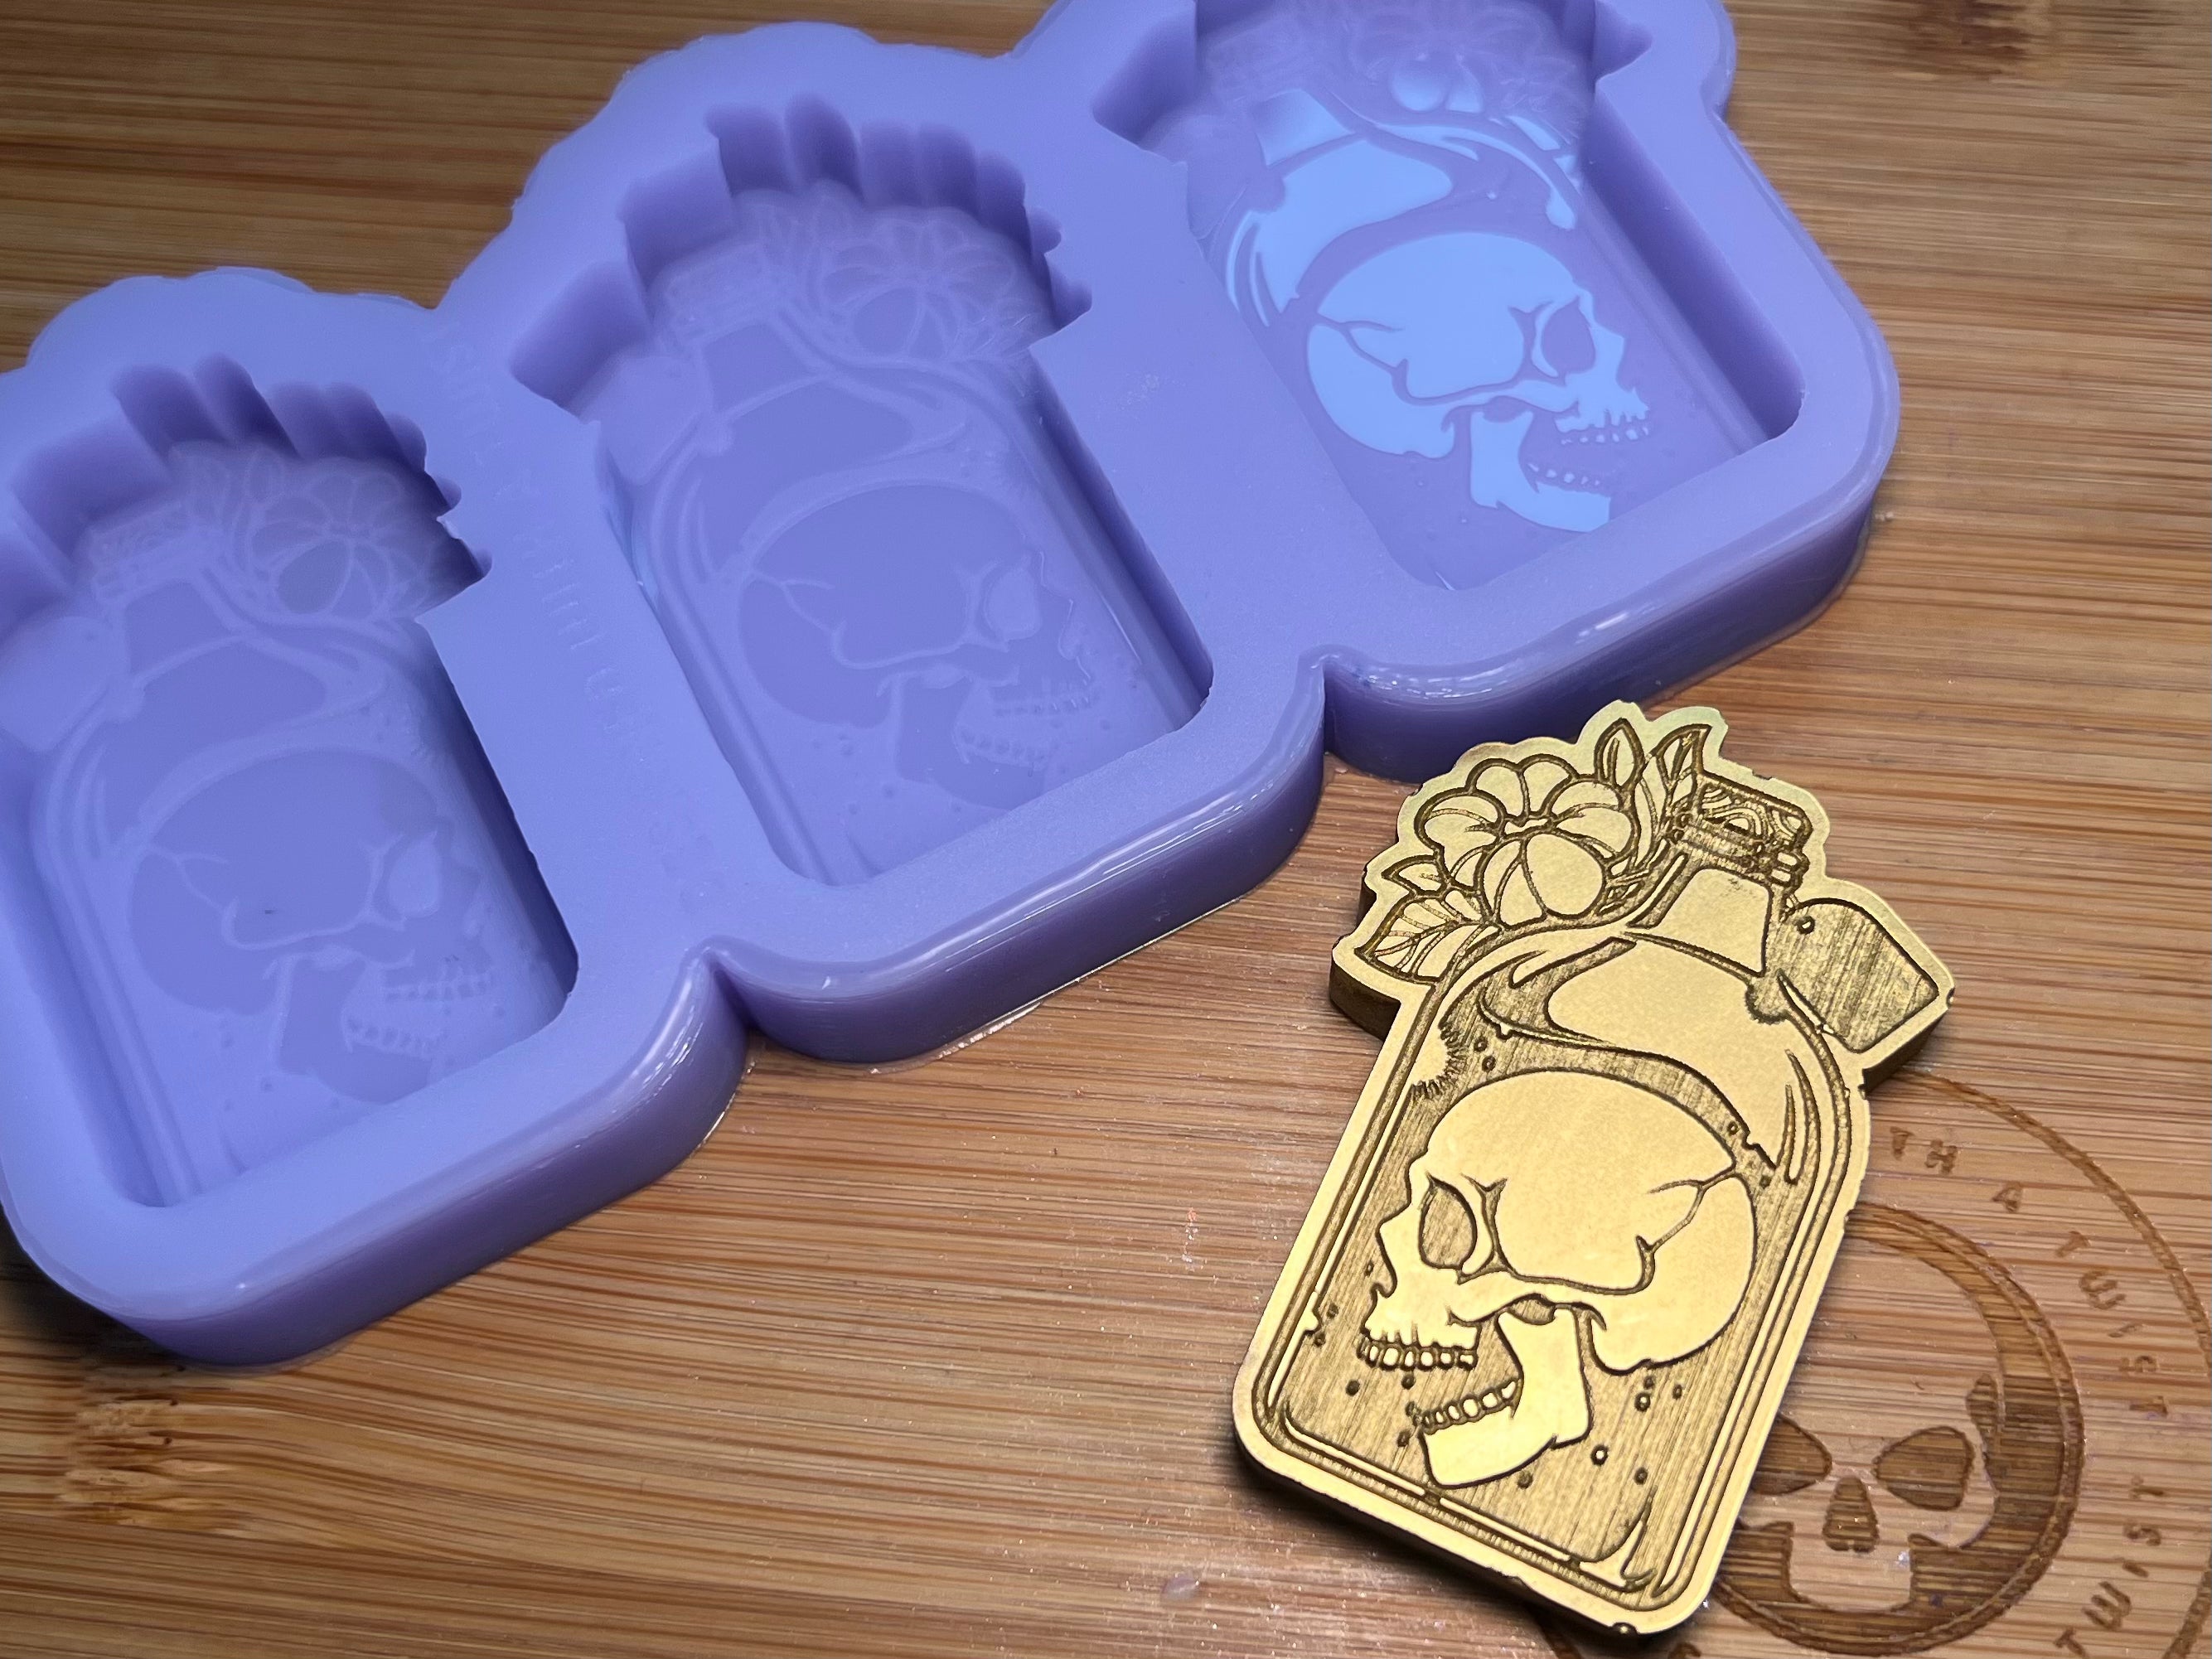 Skull Bottle Wax Melt Silicone Mold - Designed with a Twist - Top quality silicone molds made in the UK.